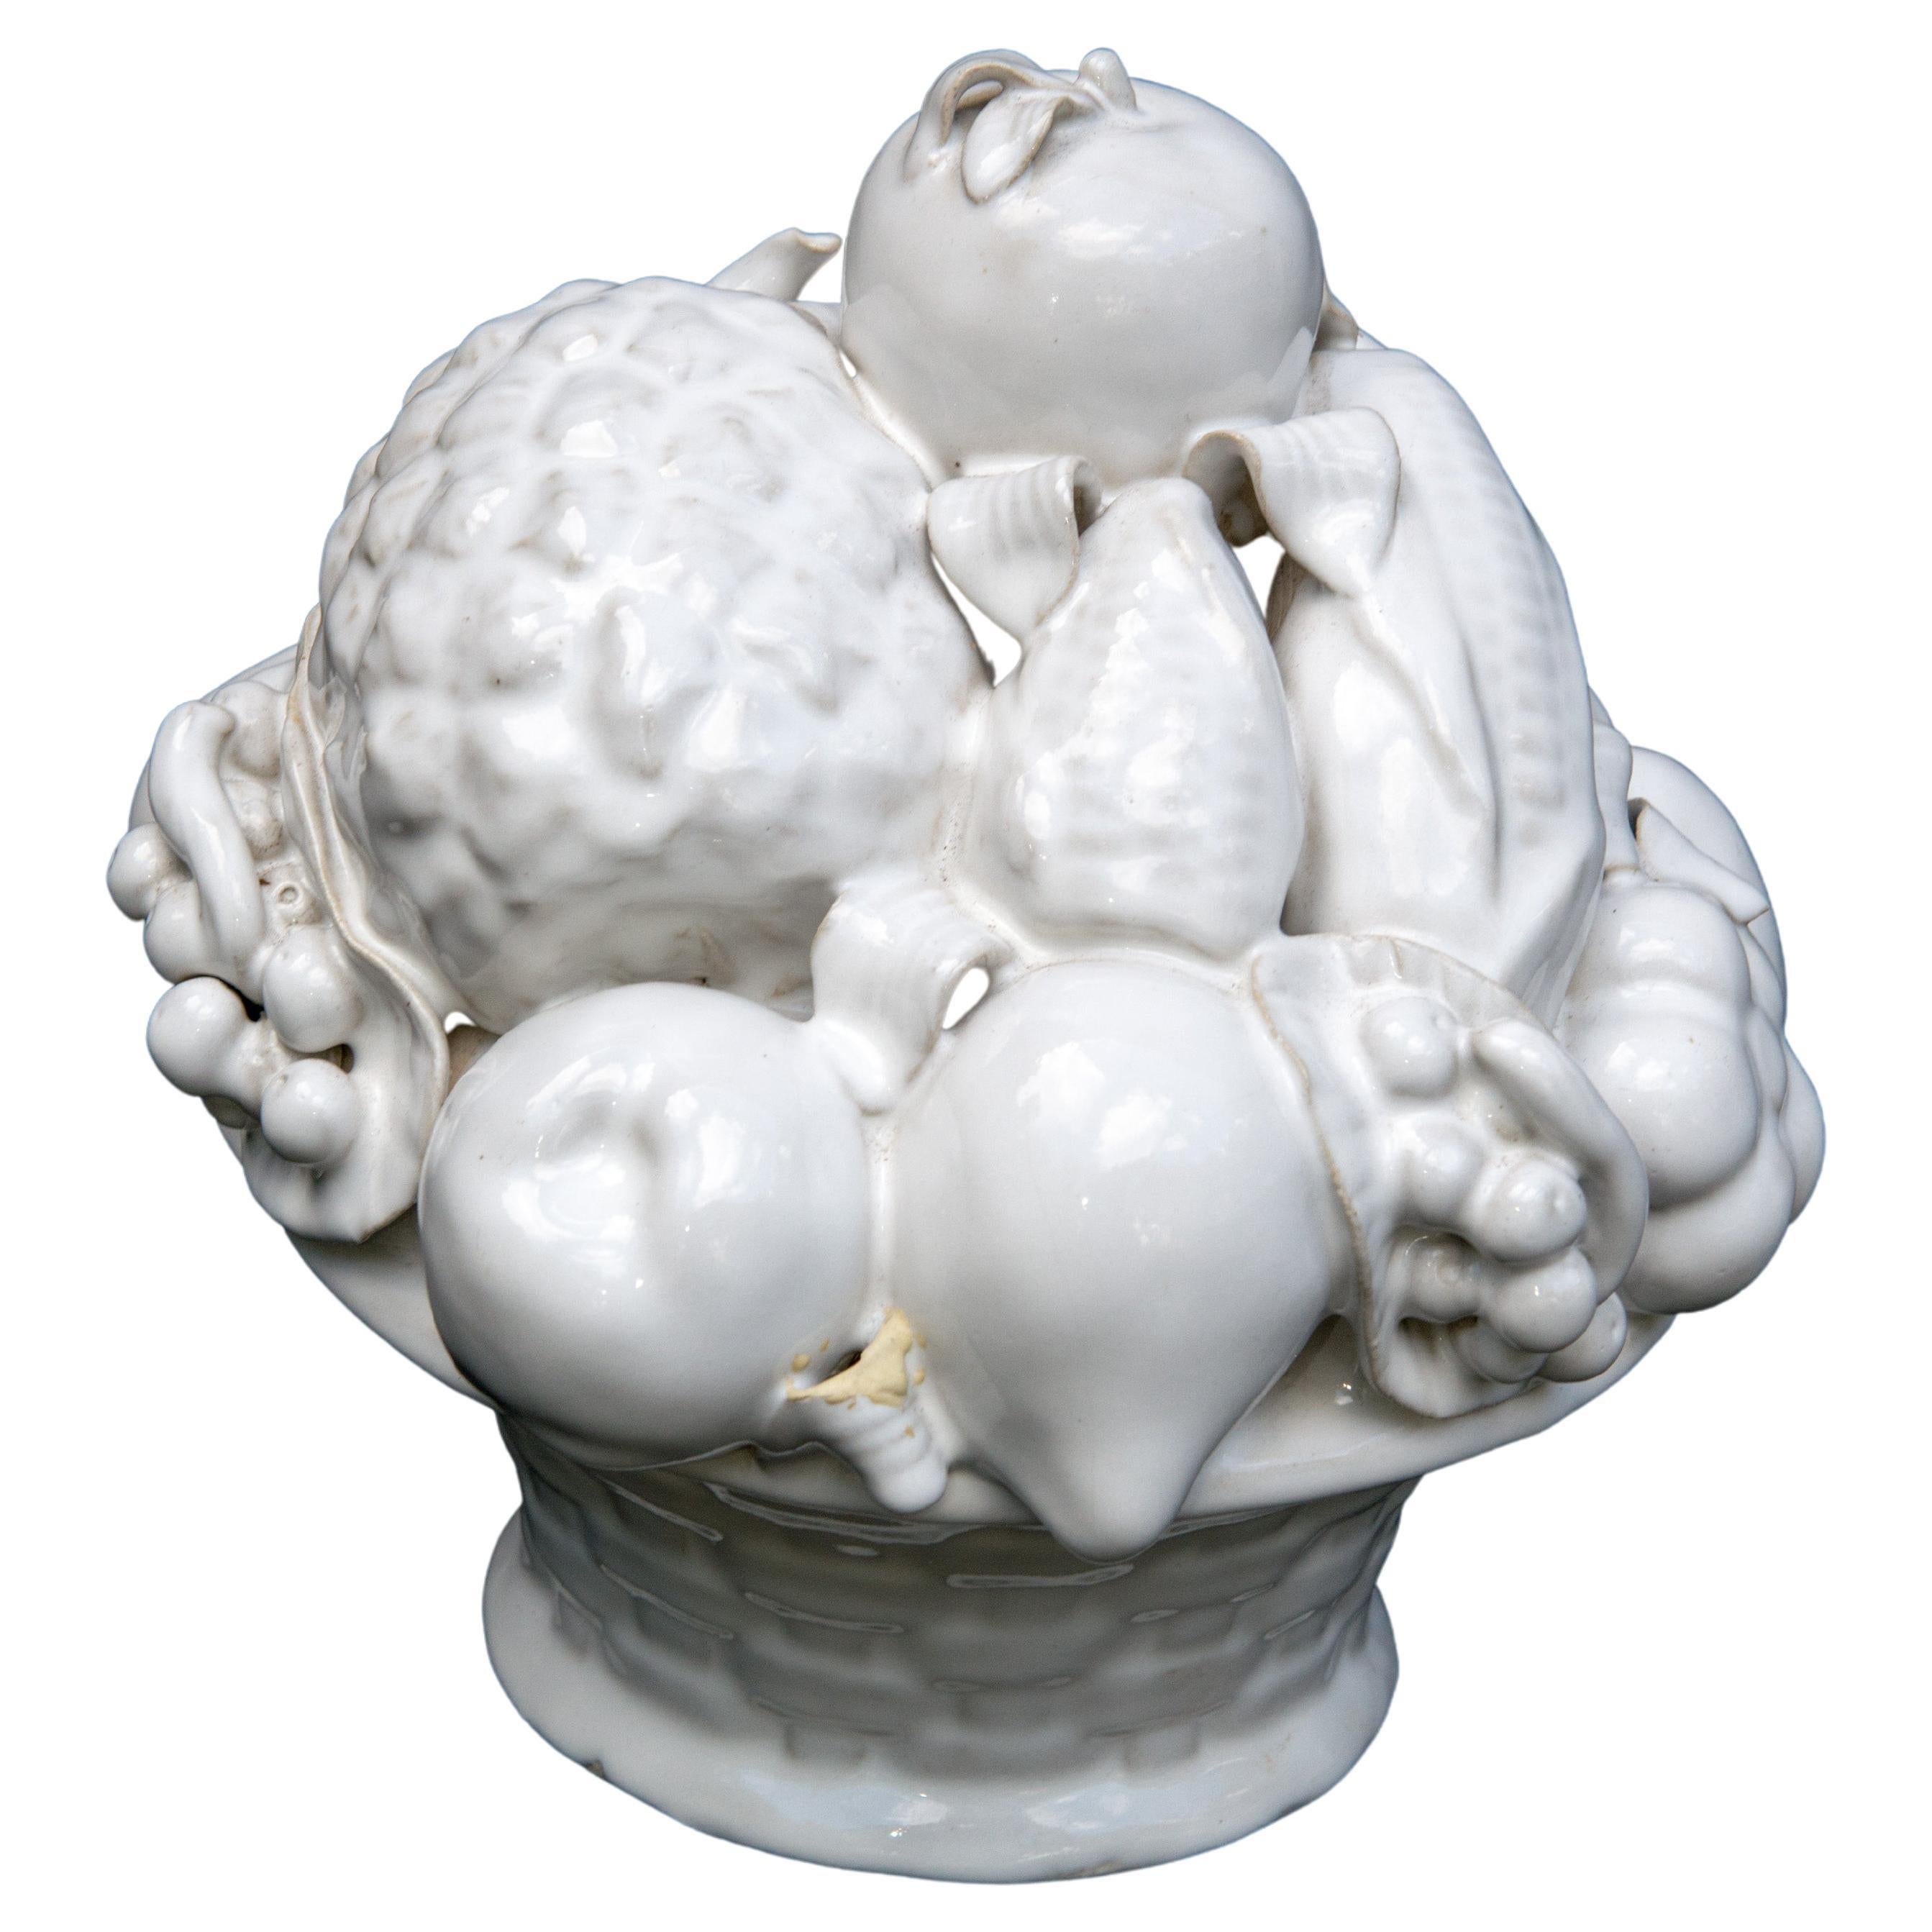 A white glazed ceramic basket of fruit, probably Italian. The pineapple stem has been repaired with a small loss. The leaf of another fruit has two two areas of mismatched filling. A stunning piece nevertheless.